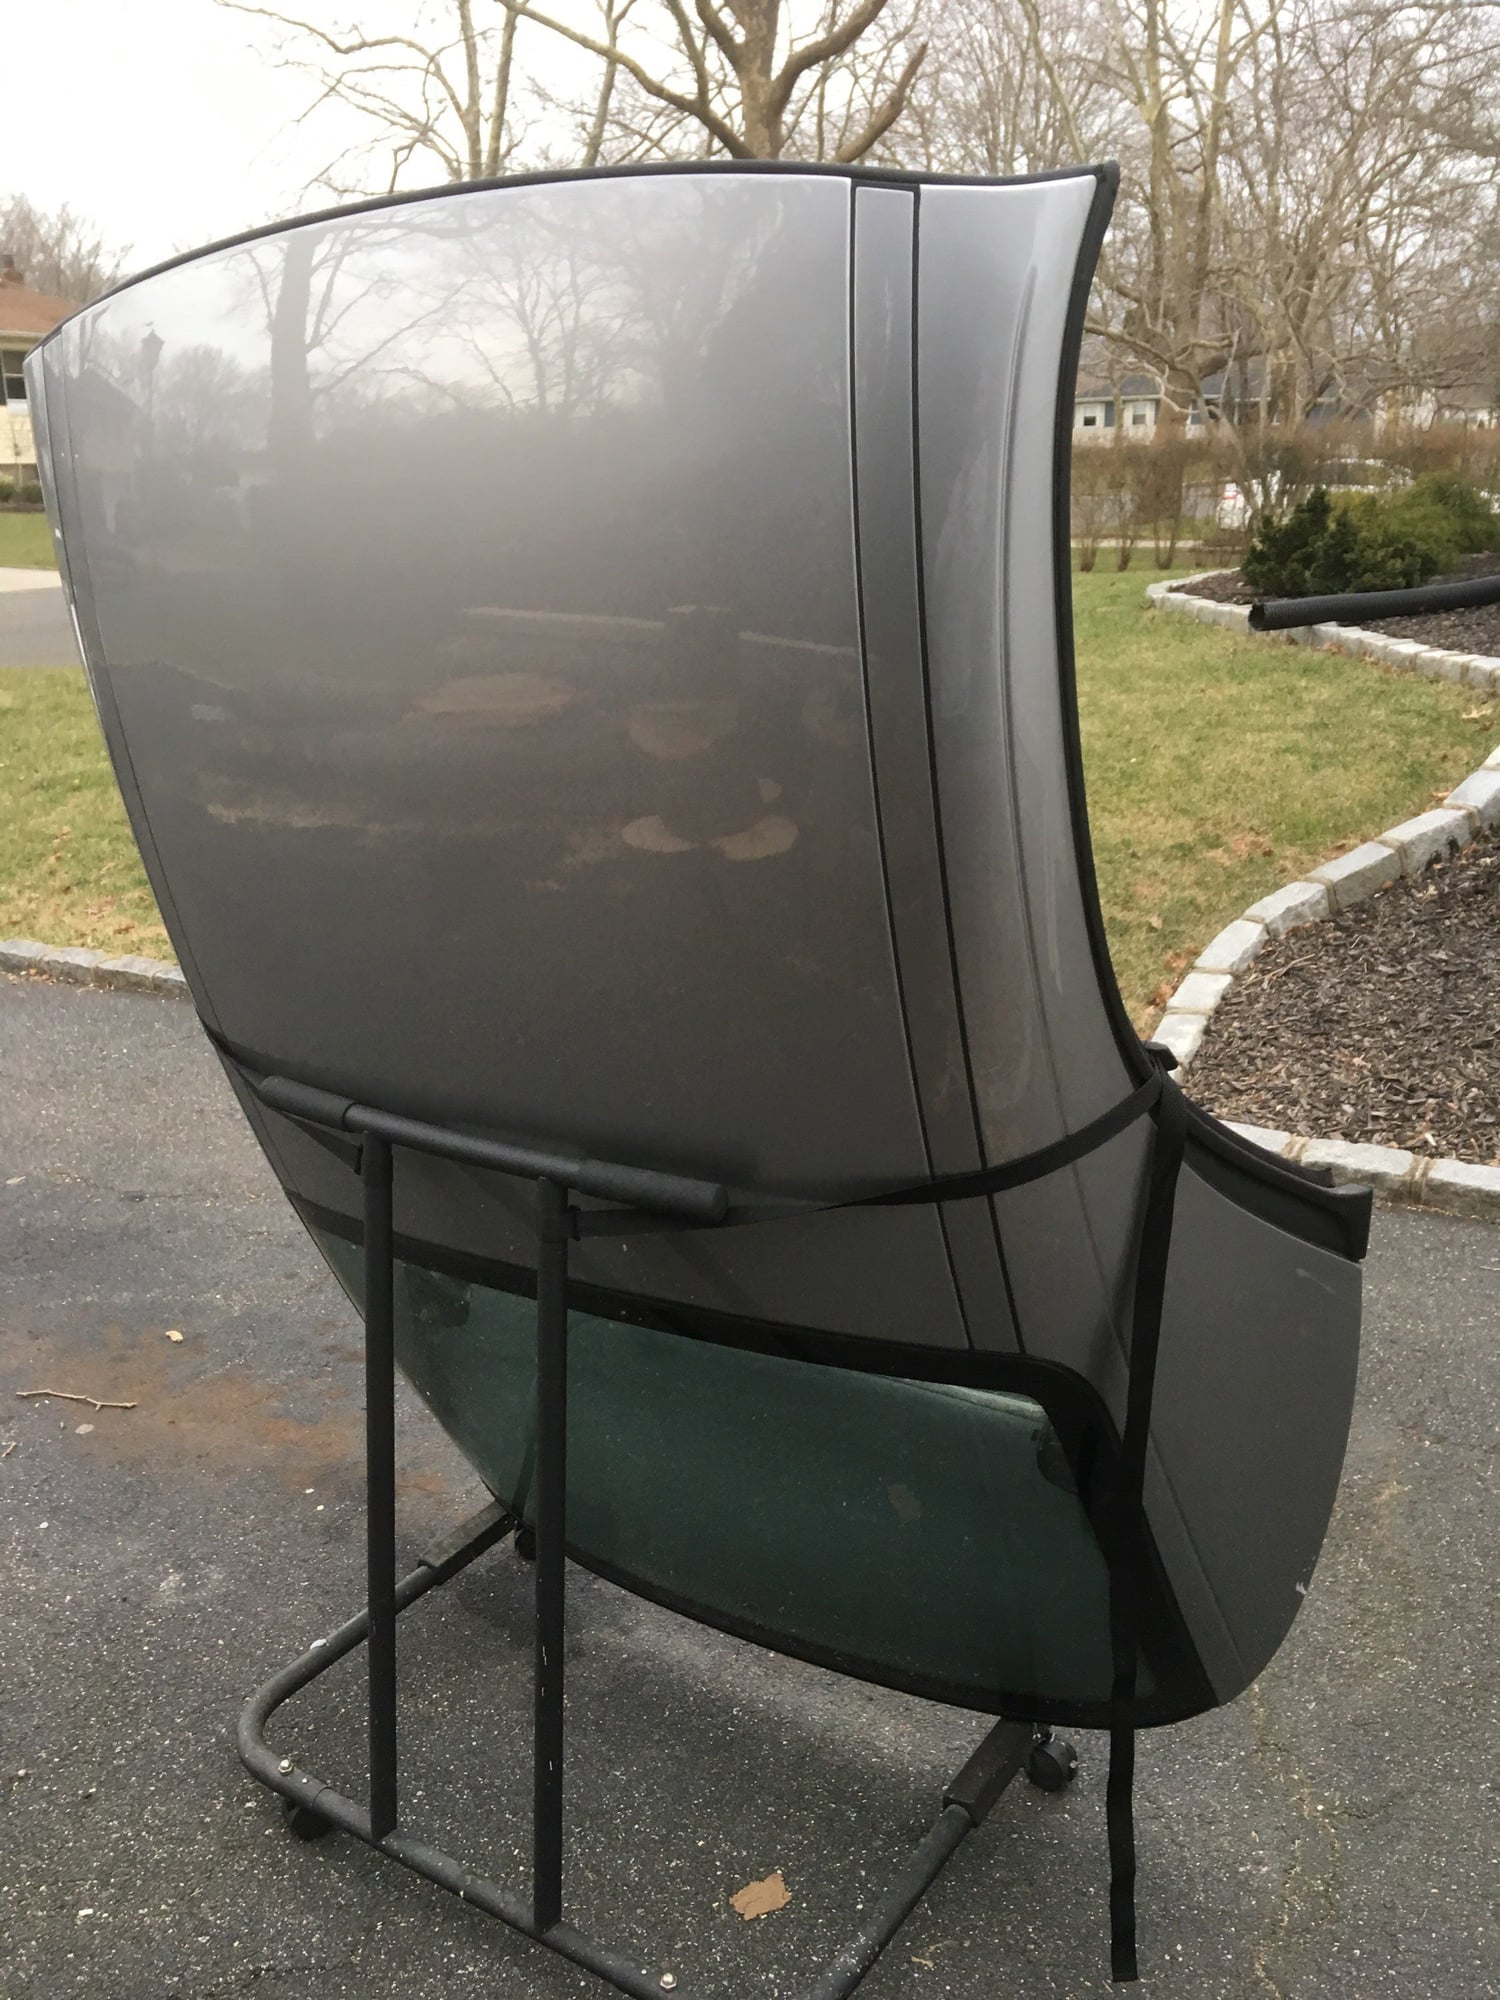 Miscellaneous - Porsche 911 top 1999-2005 with stand, wind screen & car cover - Used - 1999 to 2005 Porsche 911 - Melville, NY 11747, United States